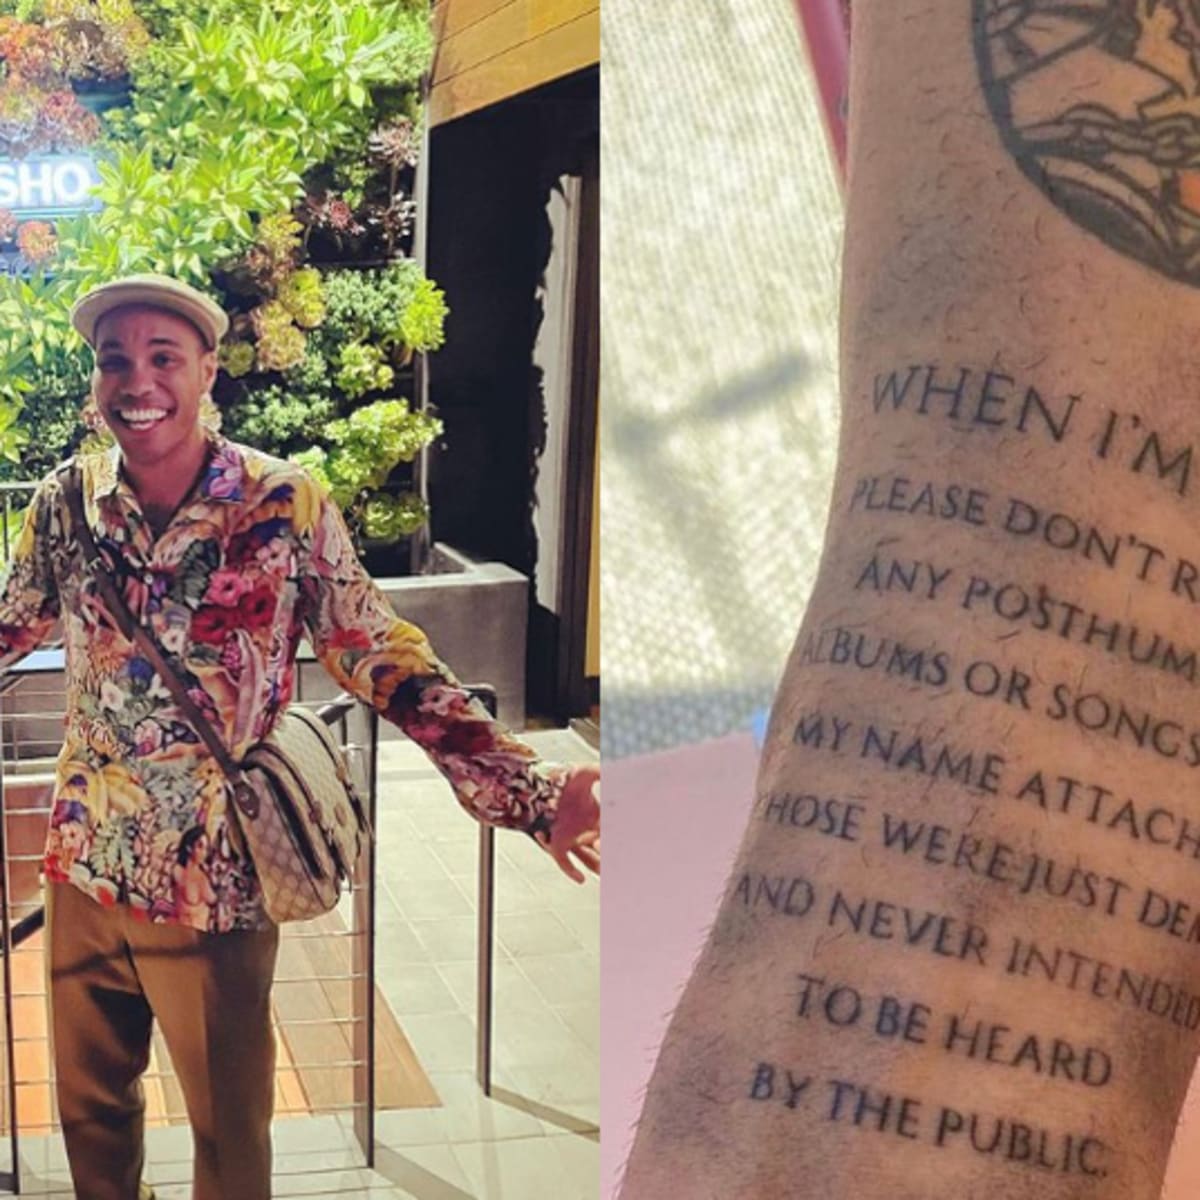 Anderson Paak gets tat warning people not to release his music posthumously